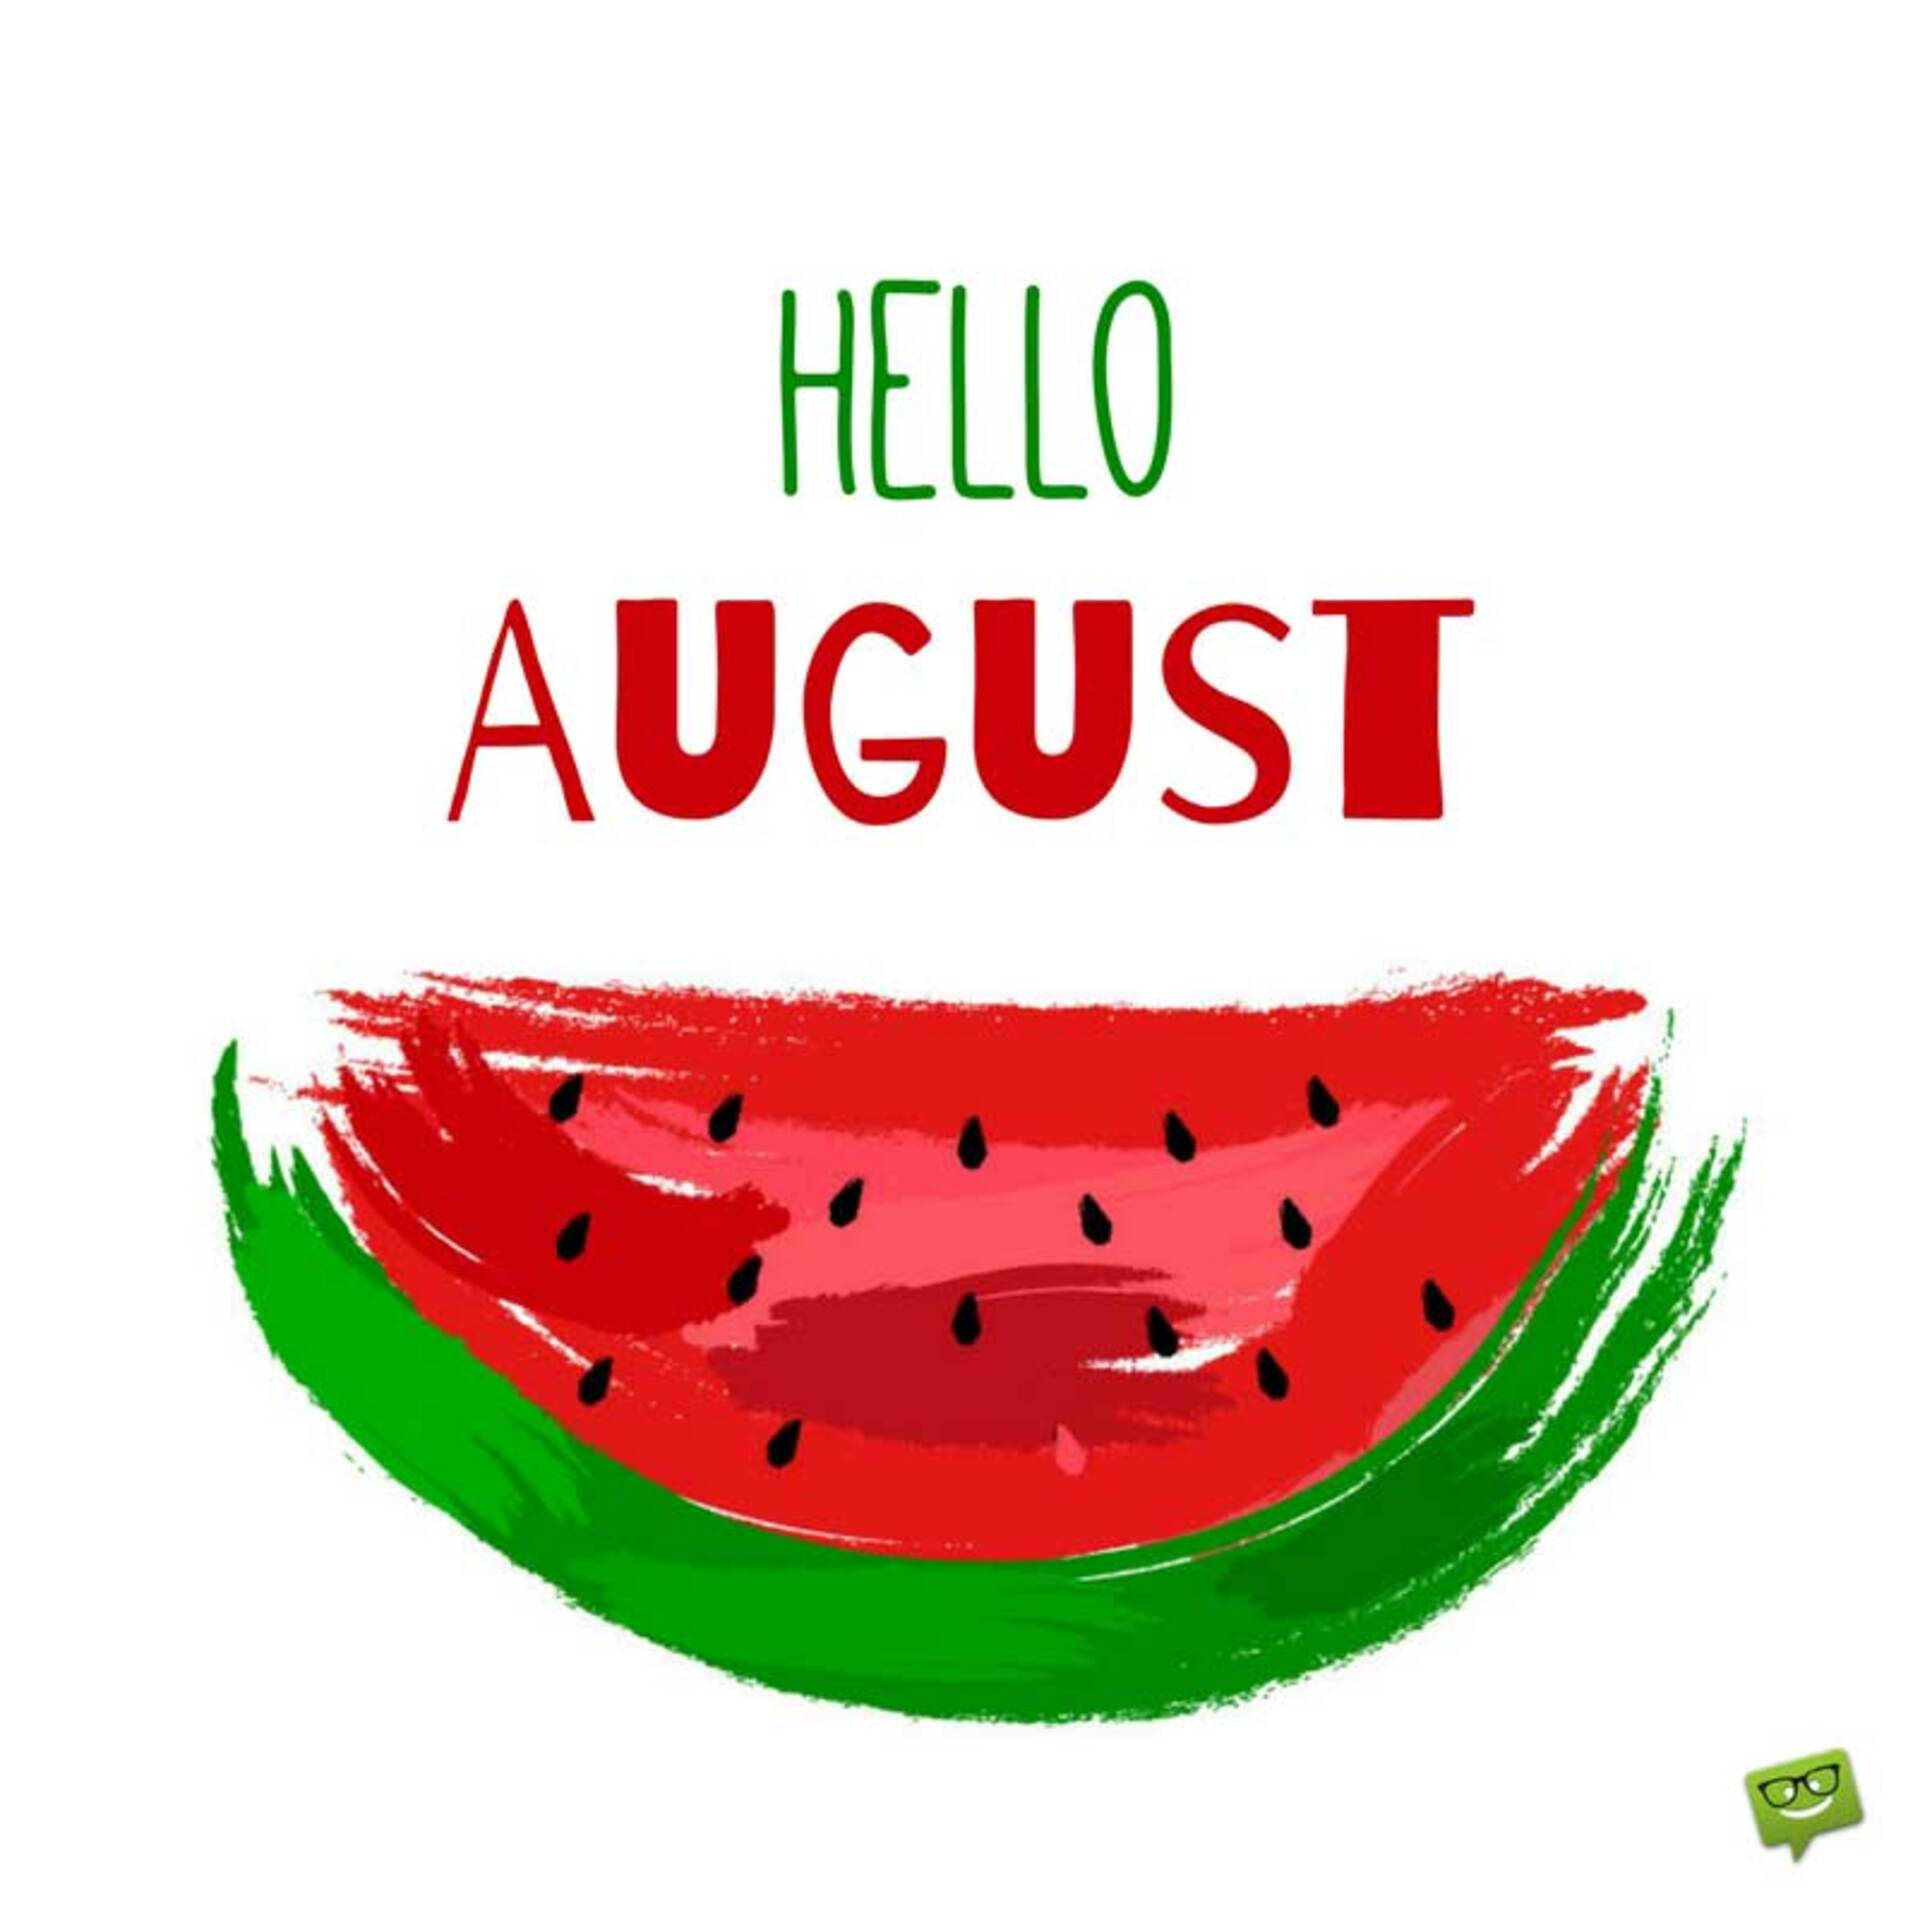 Red Watermelon August